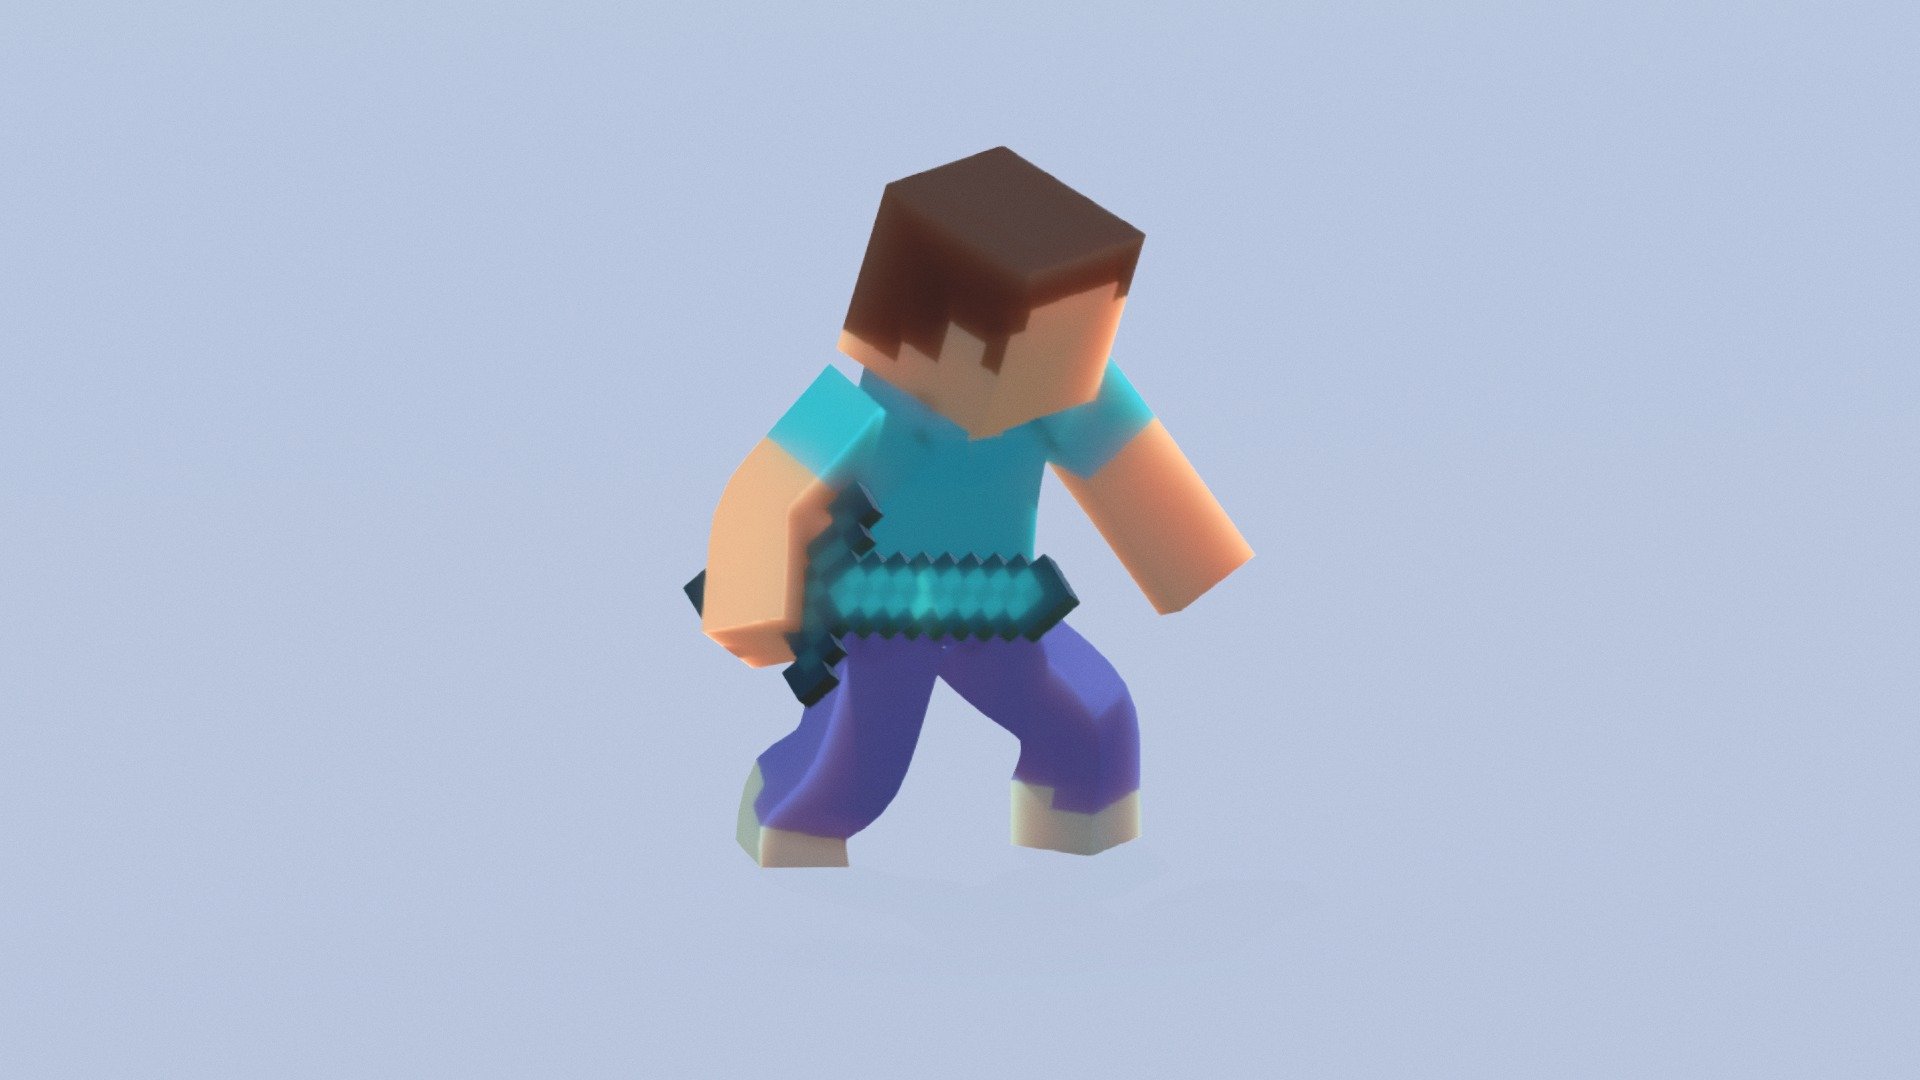 Attack steve  :d
rig and model : me - Minecraft(steve)Attack! - 3D model by Opitax 3d model